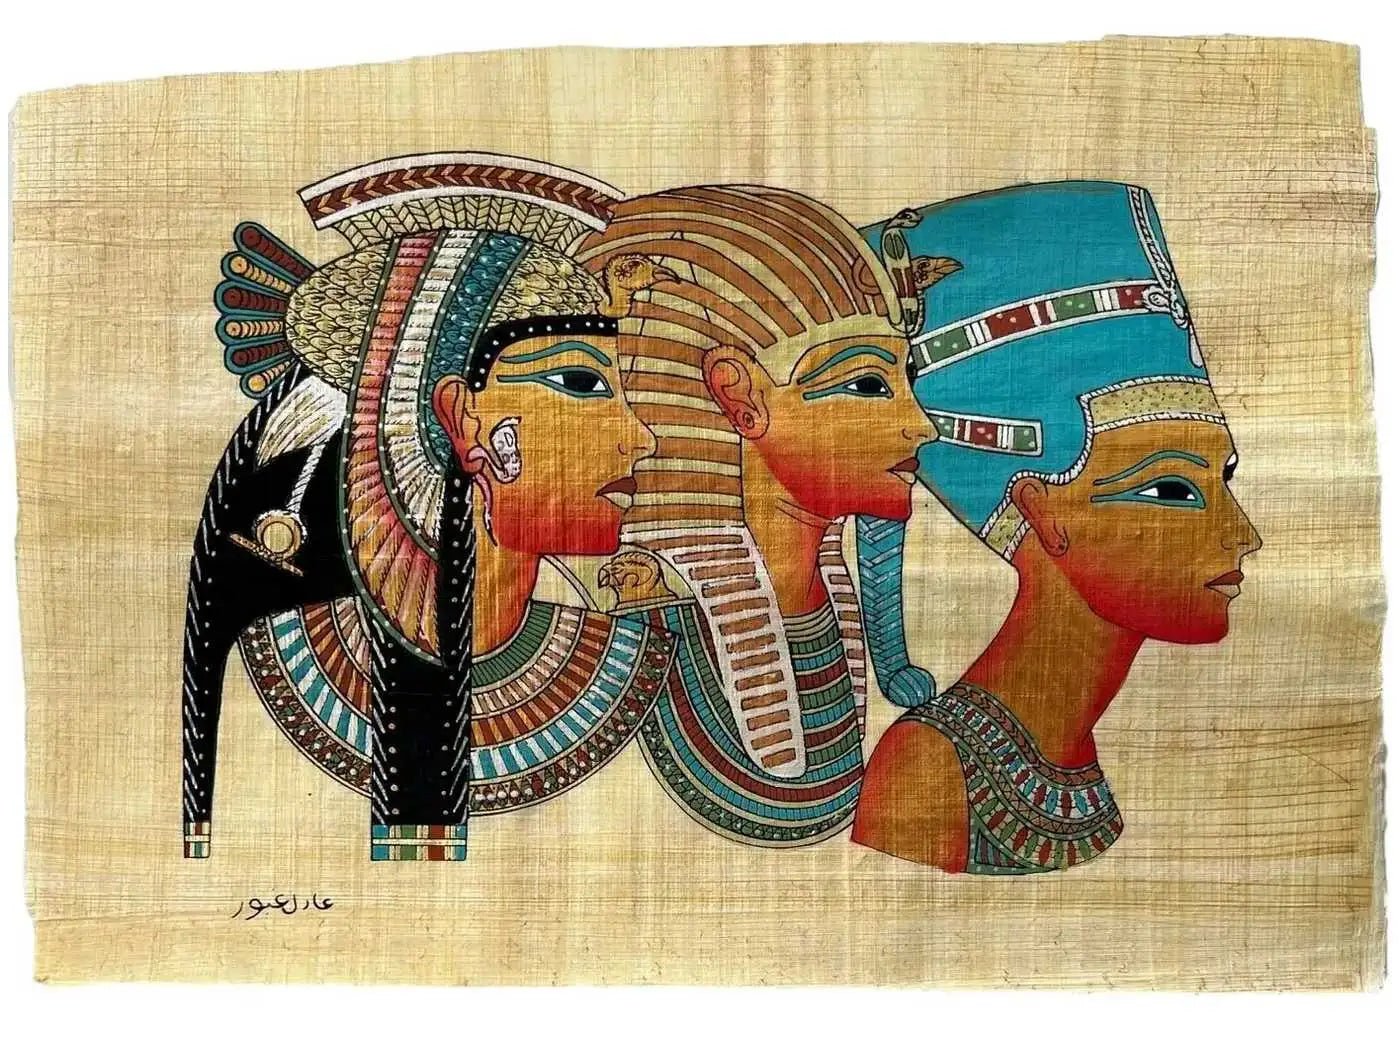 Cleopatra in Royal Vulture Crown, Tutankhamen in Nemes, Nefertiti in Modius Papyrus Egyptian Hand-Made Papyrus Painting 13x9 inches